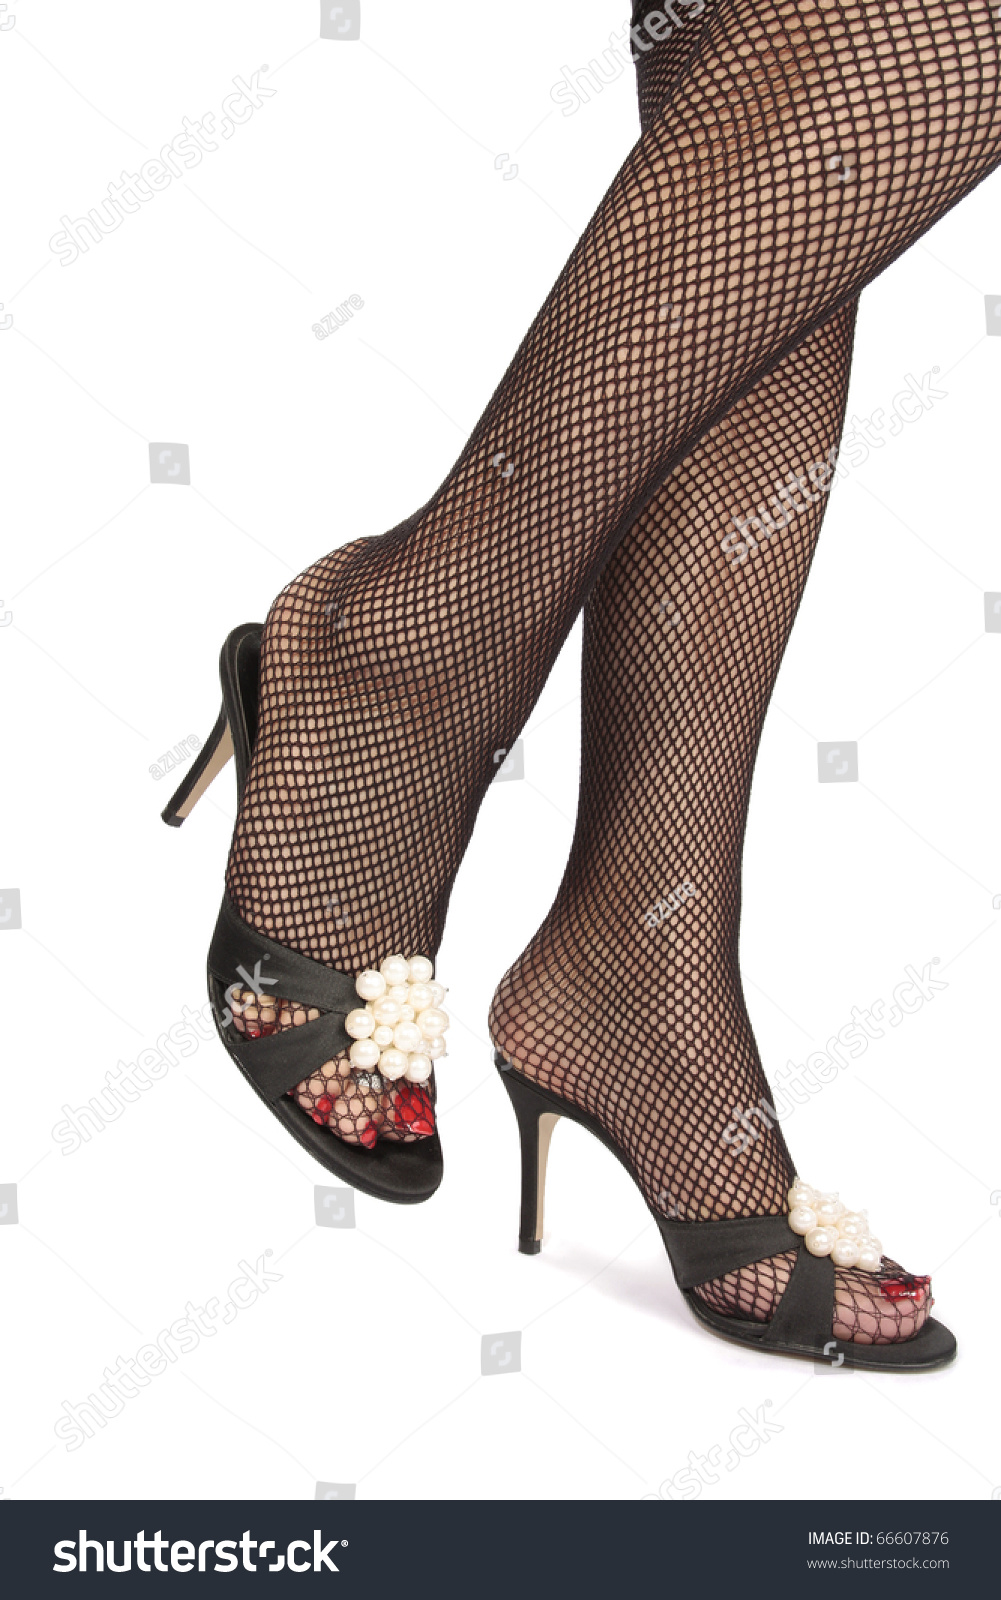 Woman Legs With Fishnet Stockings And Heels Over White Background Stock ...